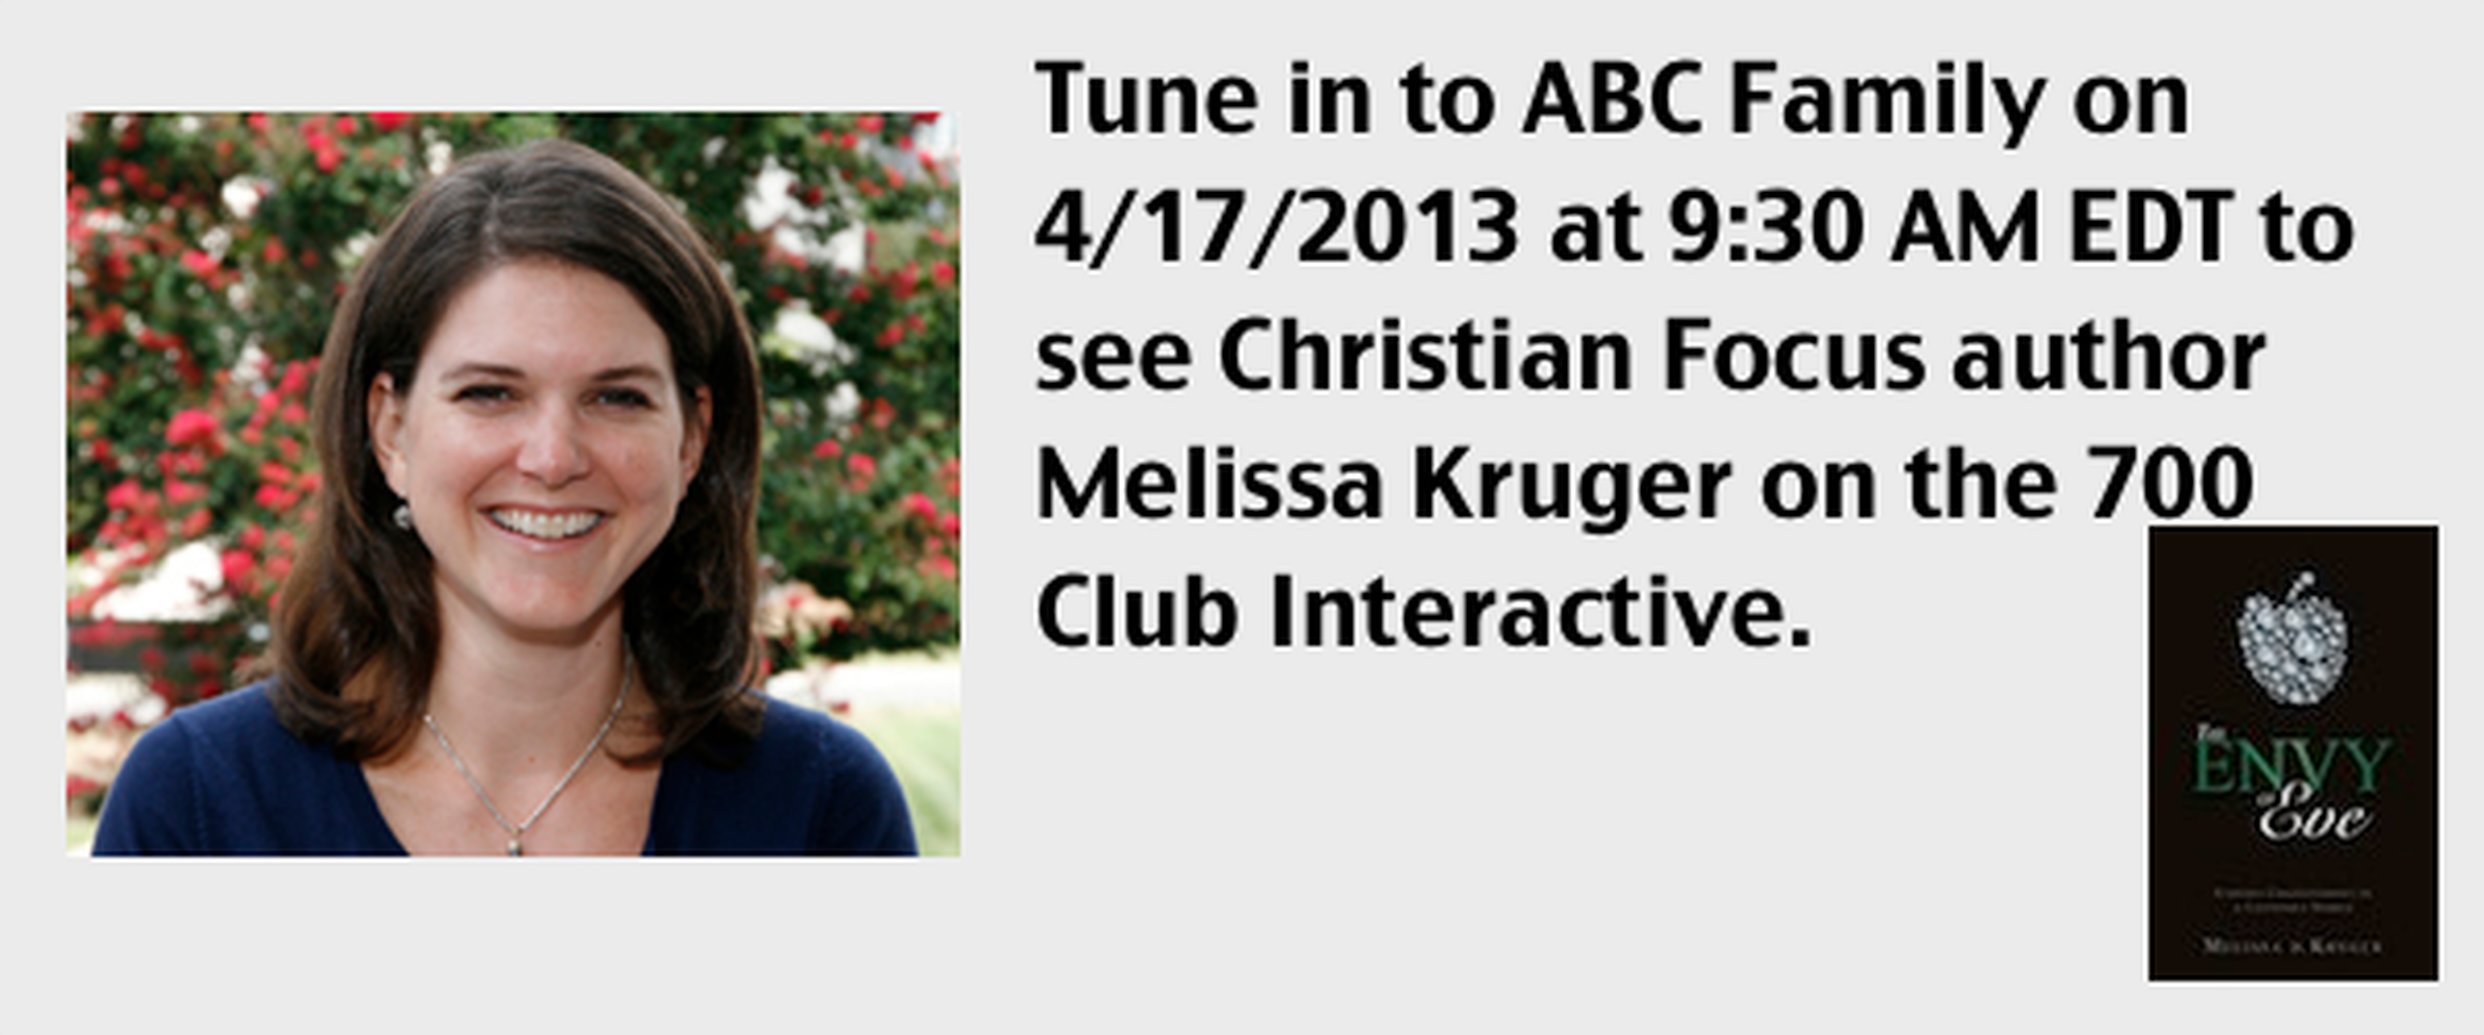 See Melissa Kruger on the 700 Club Interactive - 4/17/2013 at 9:30 AM EDT